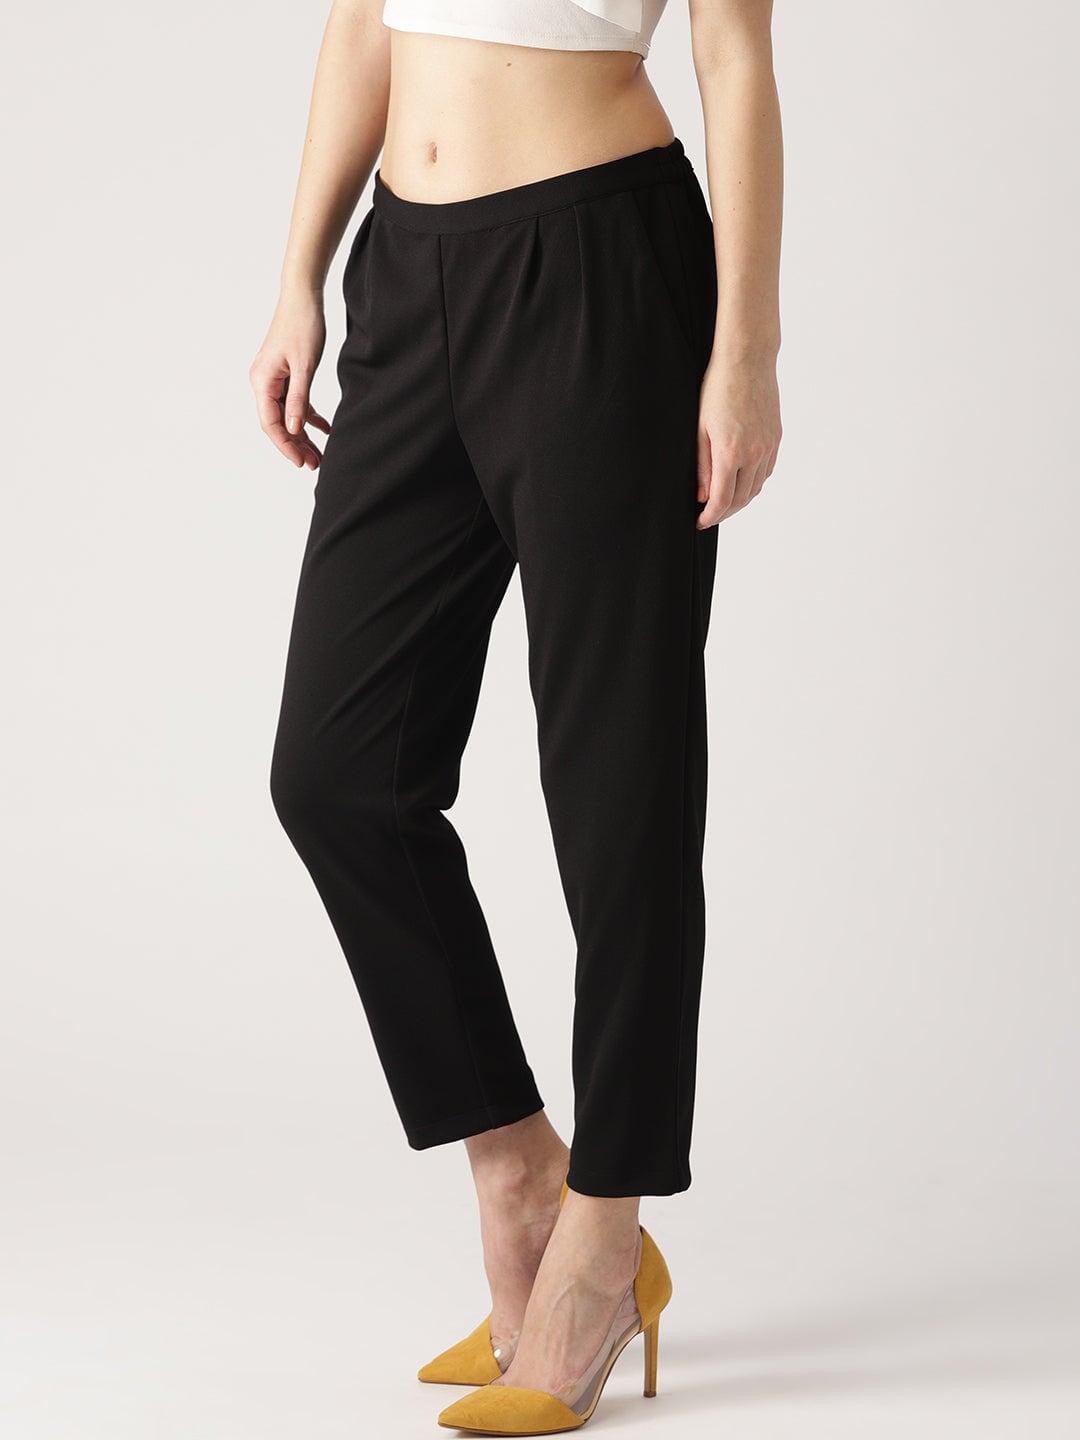 Black Solid Polyester Trousers